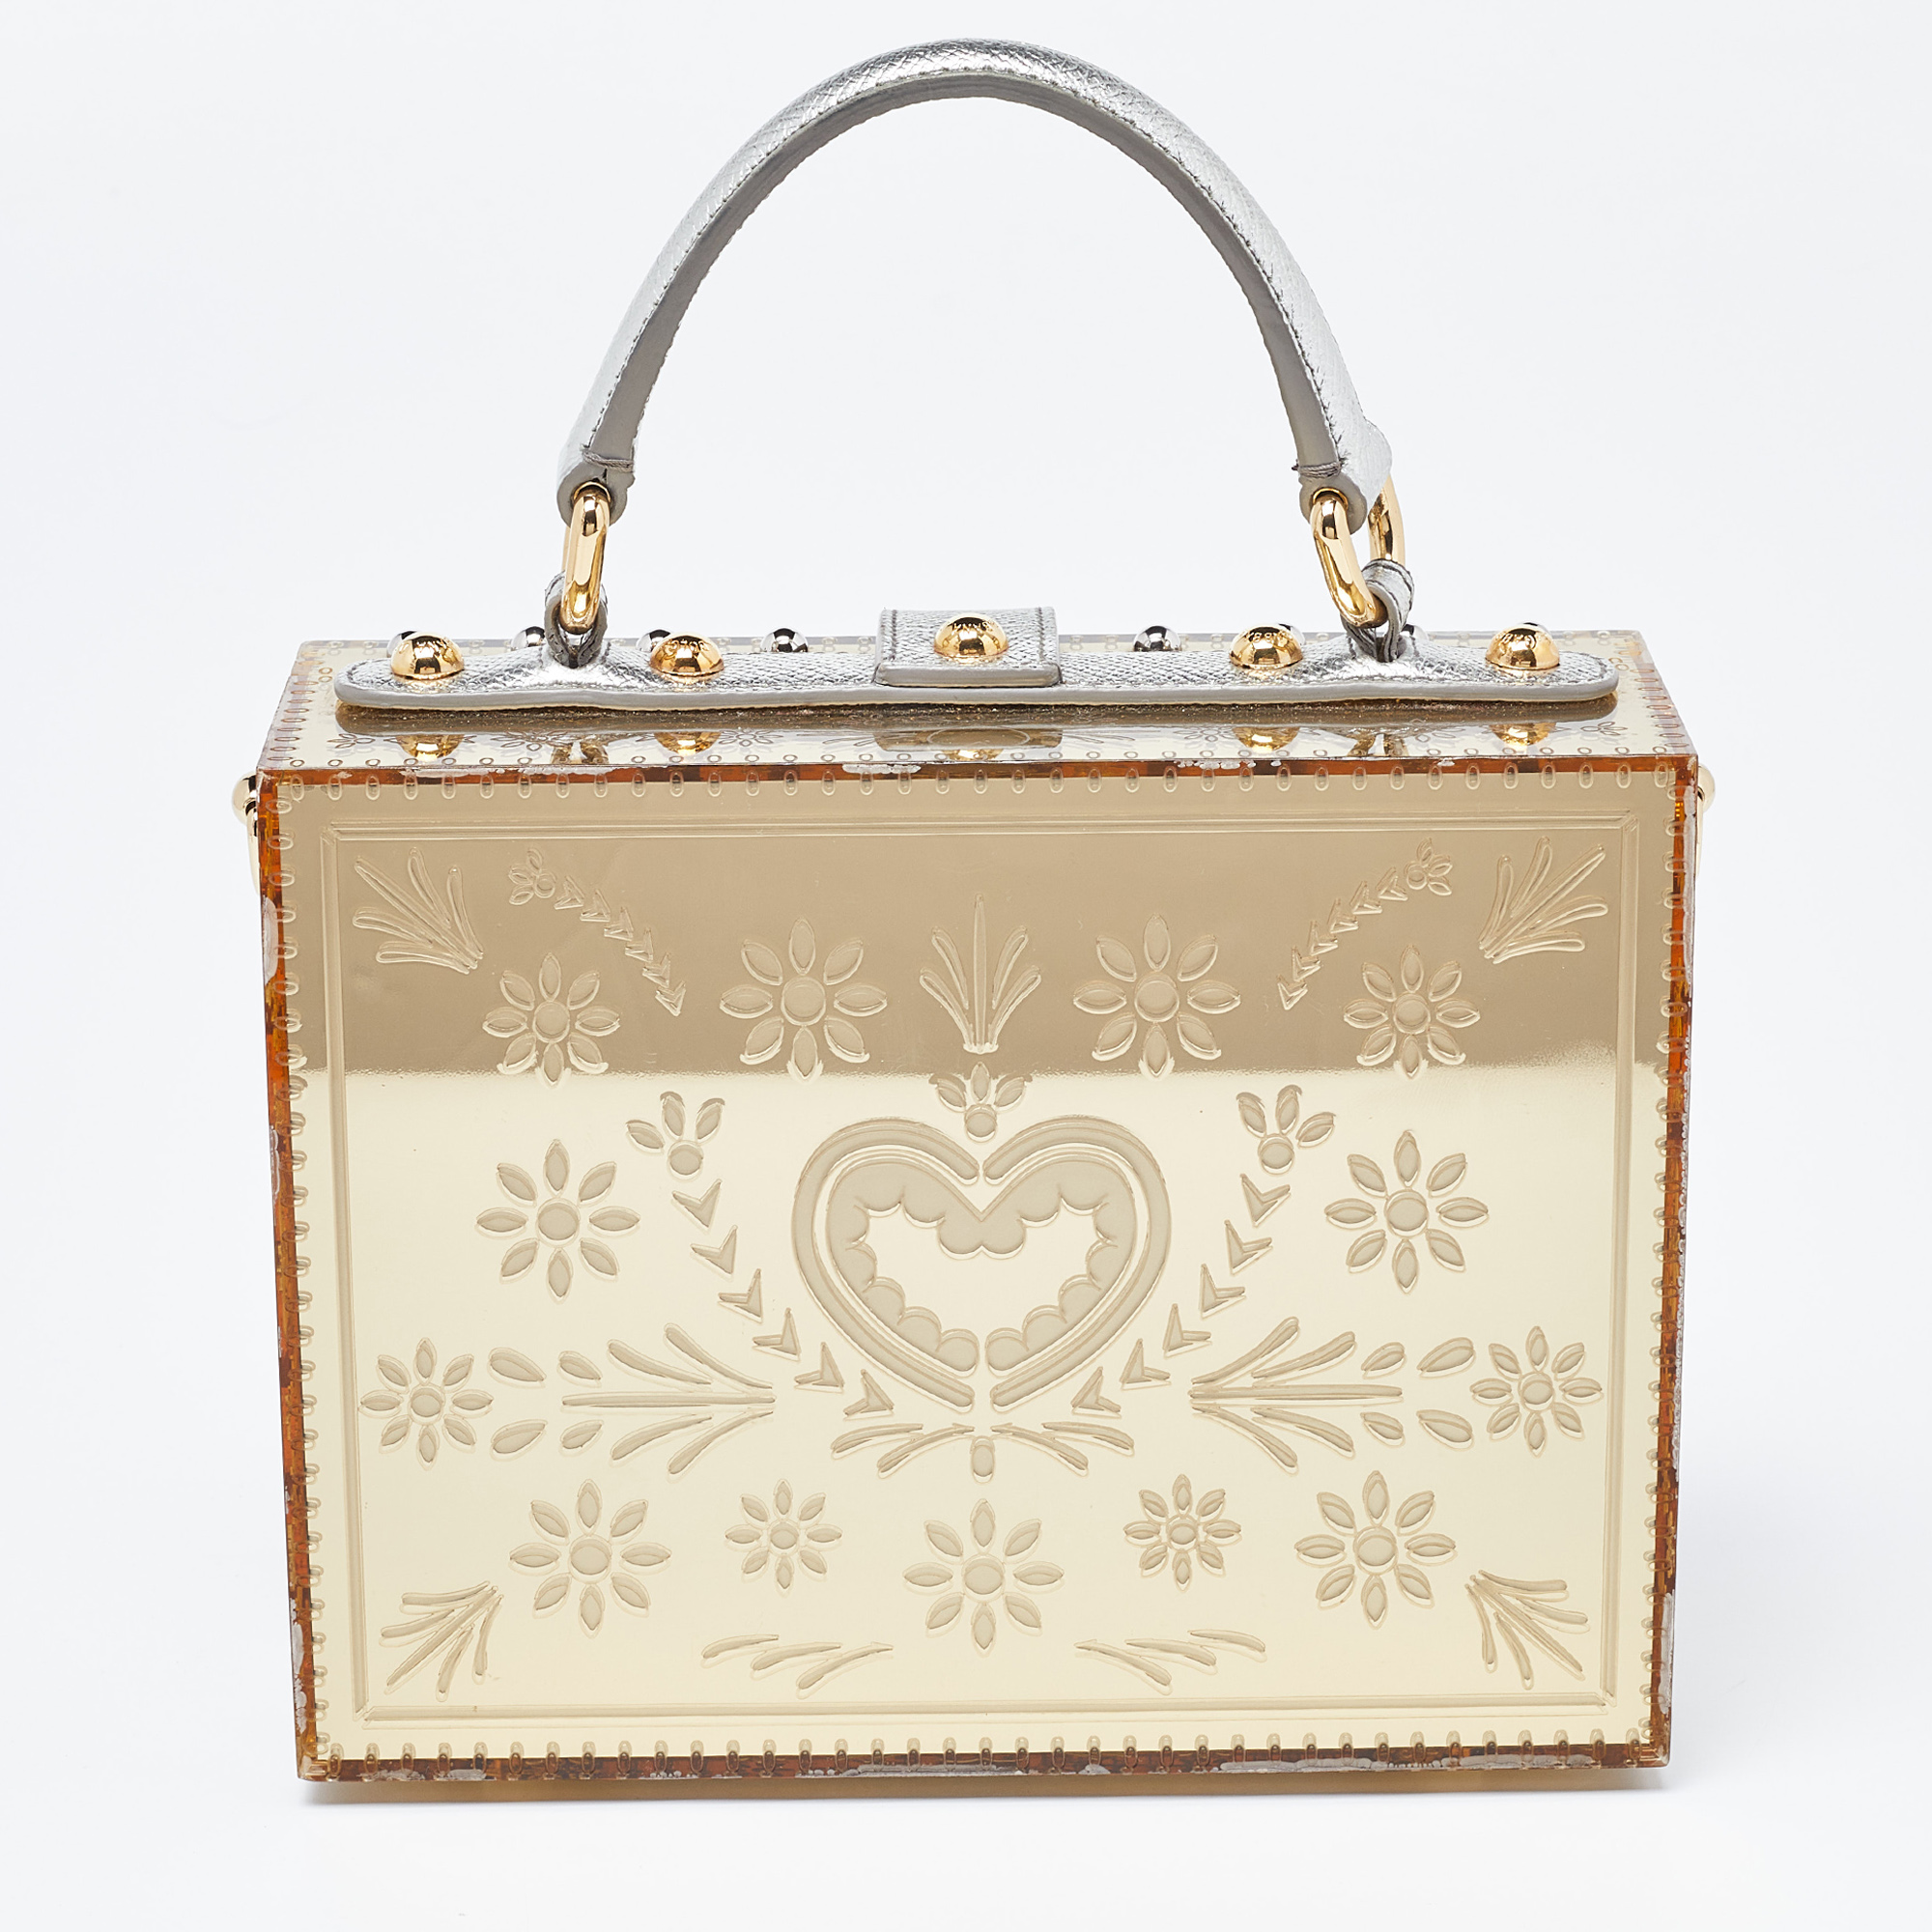 Dolce & Gabbana Gold Acrylic And Leather Crystal Embellished Dolce Box Bag